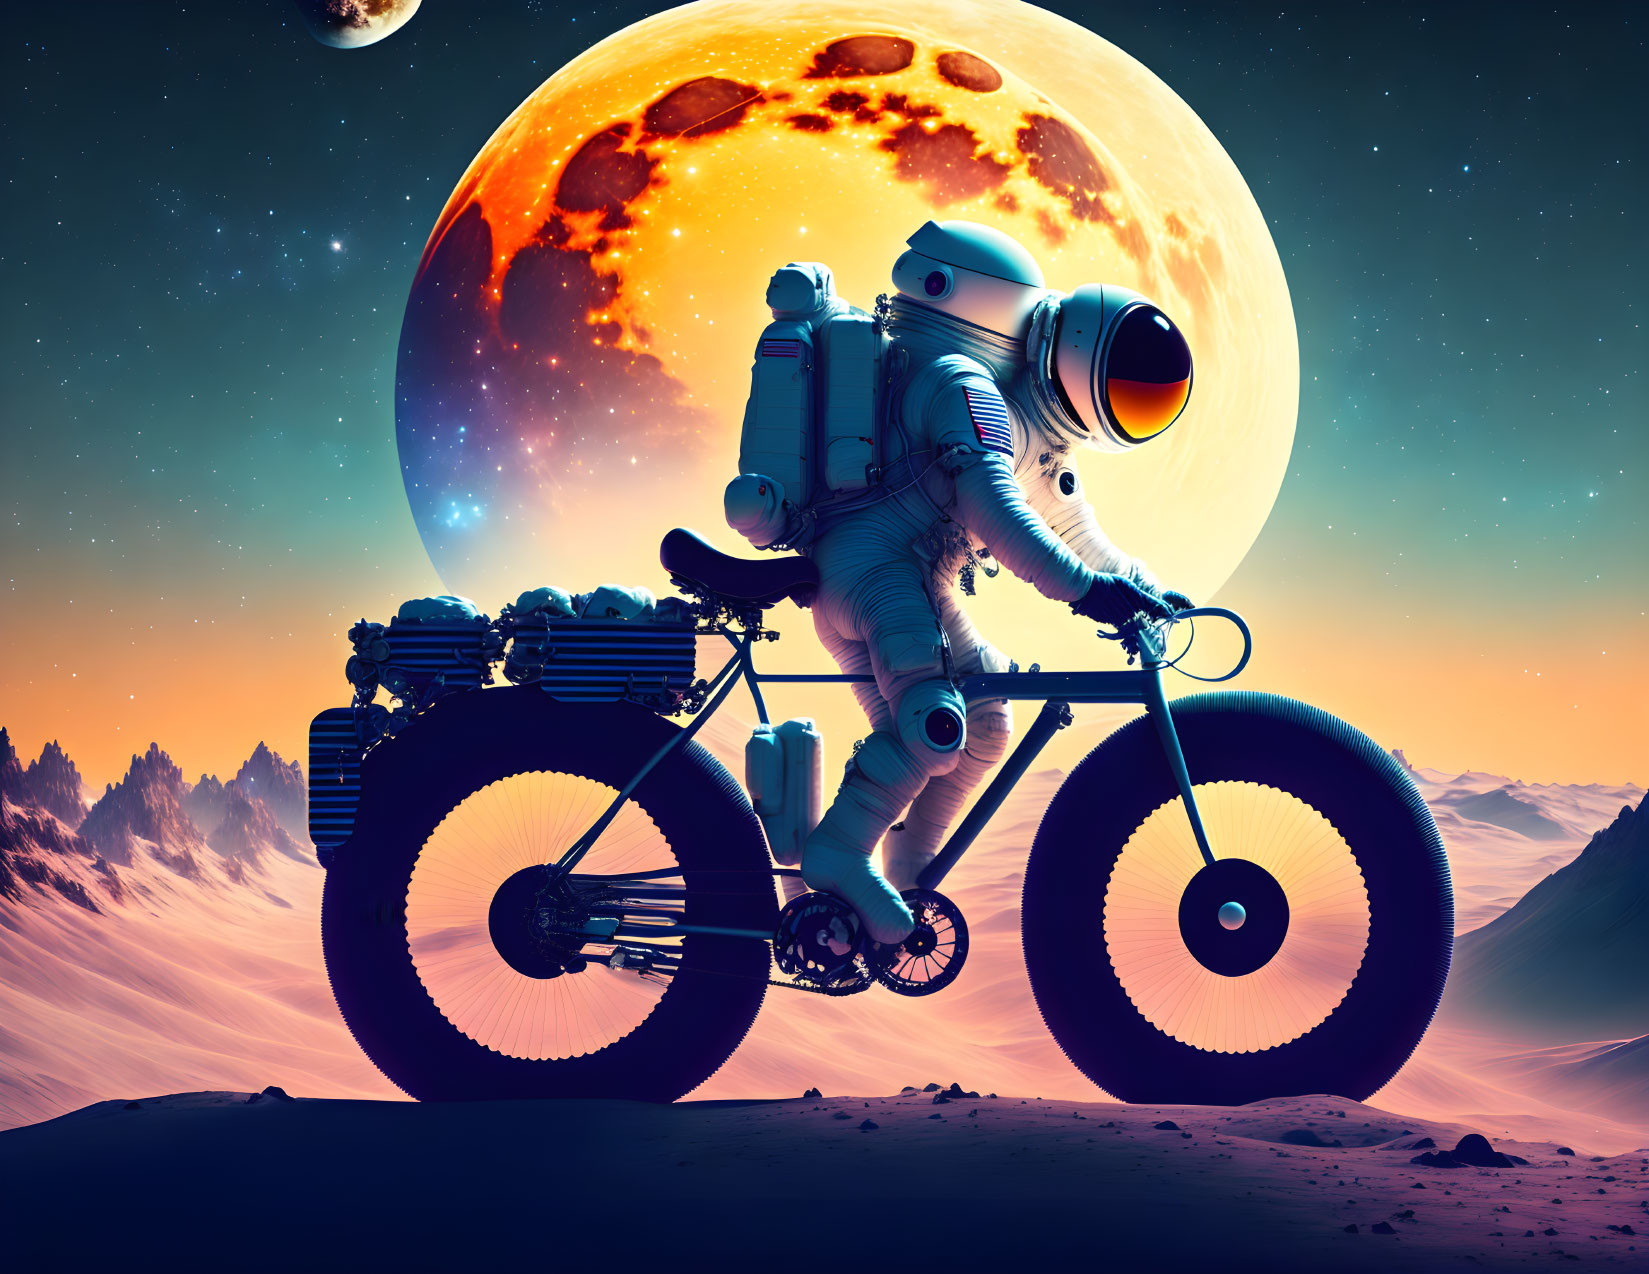 Spaceman on a Bicycle